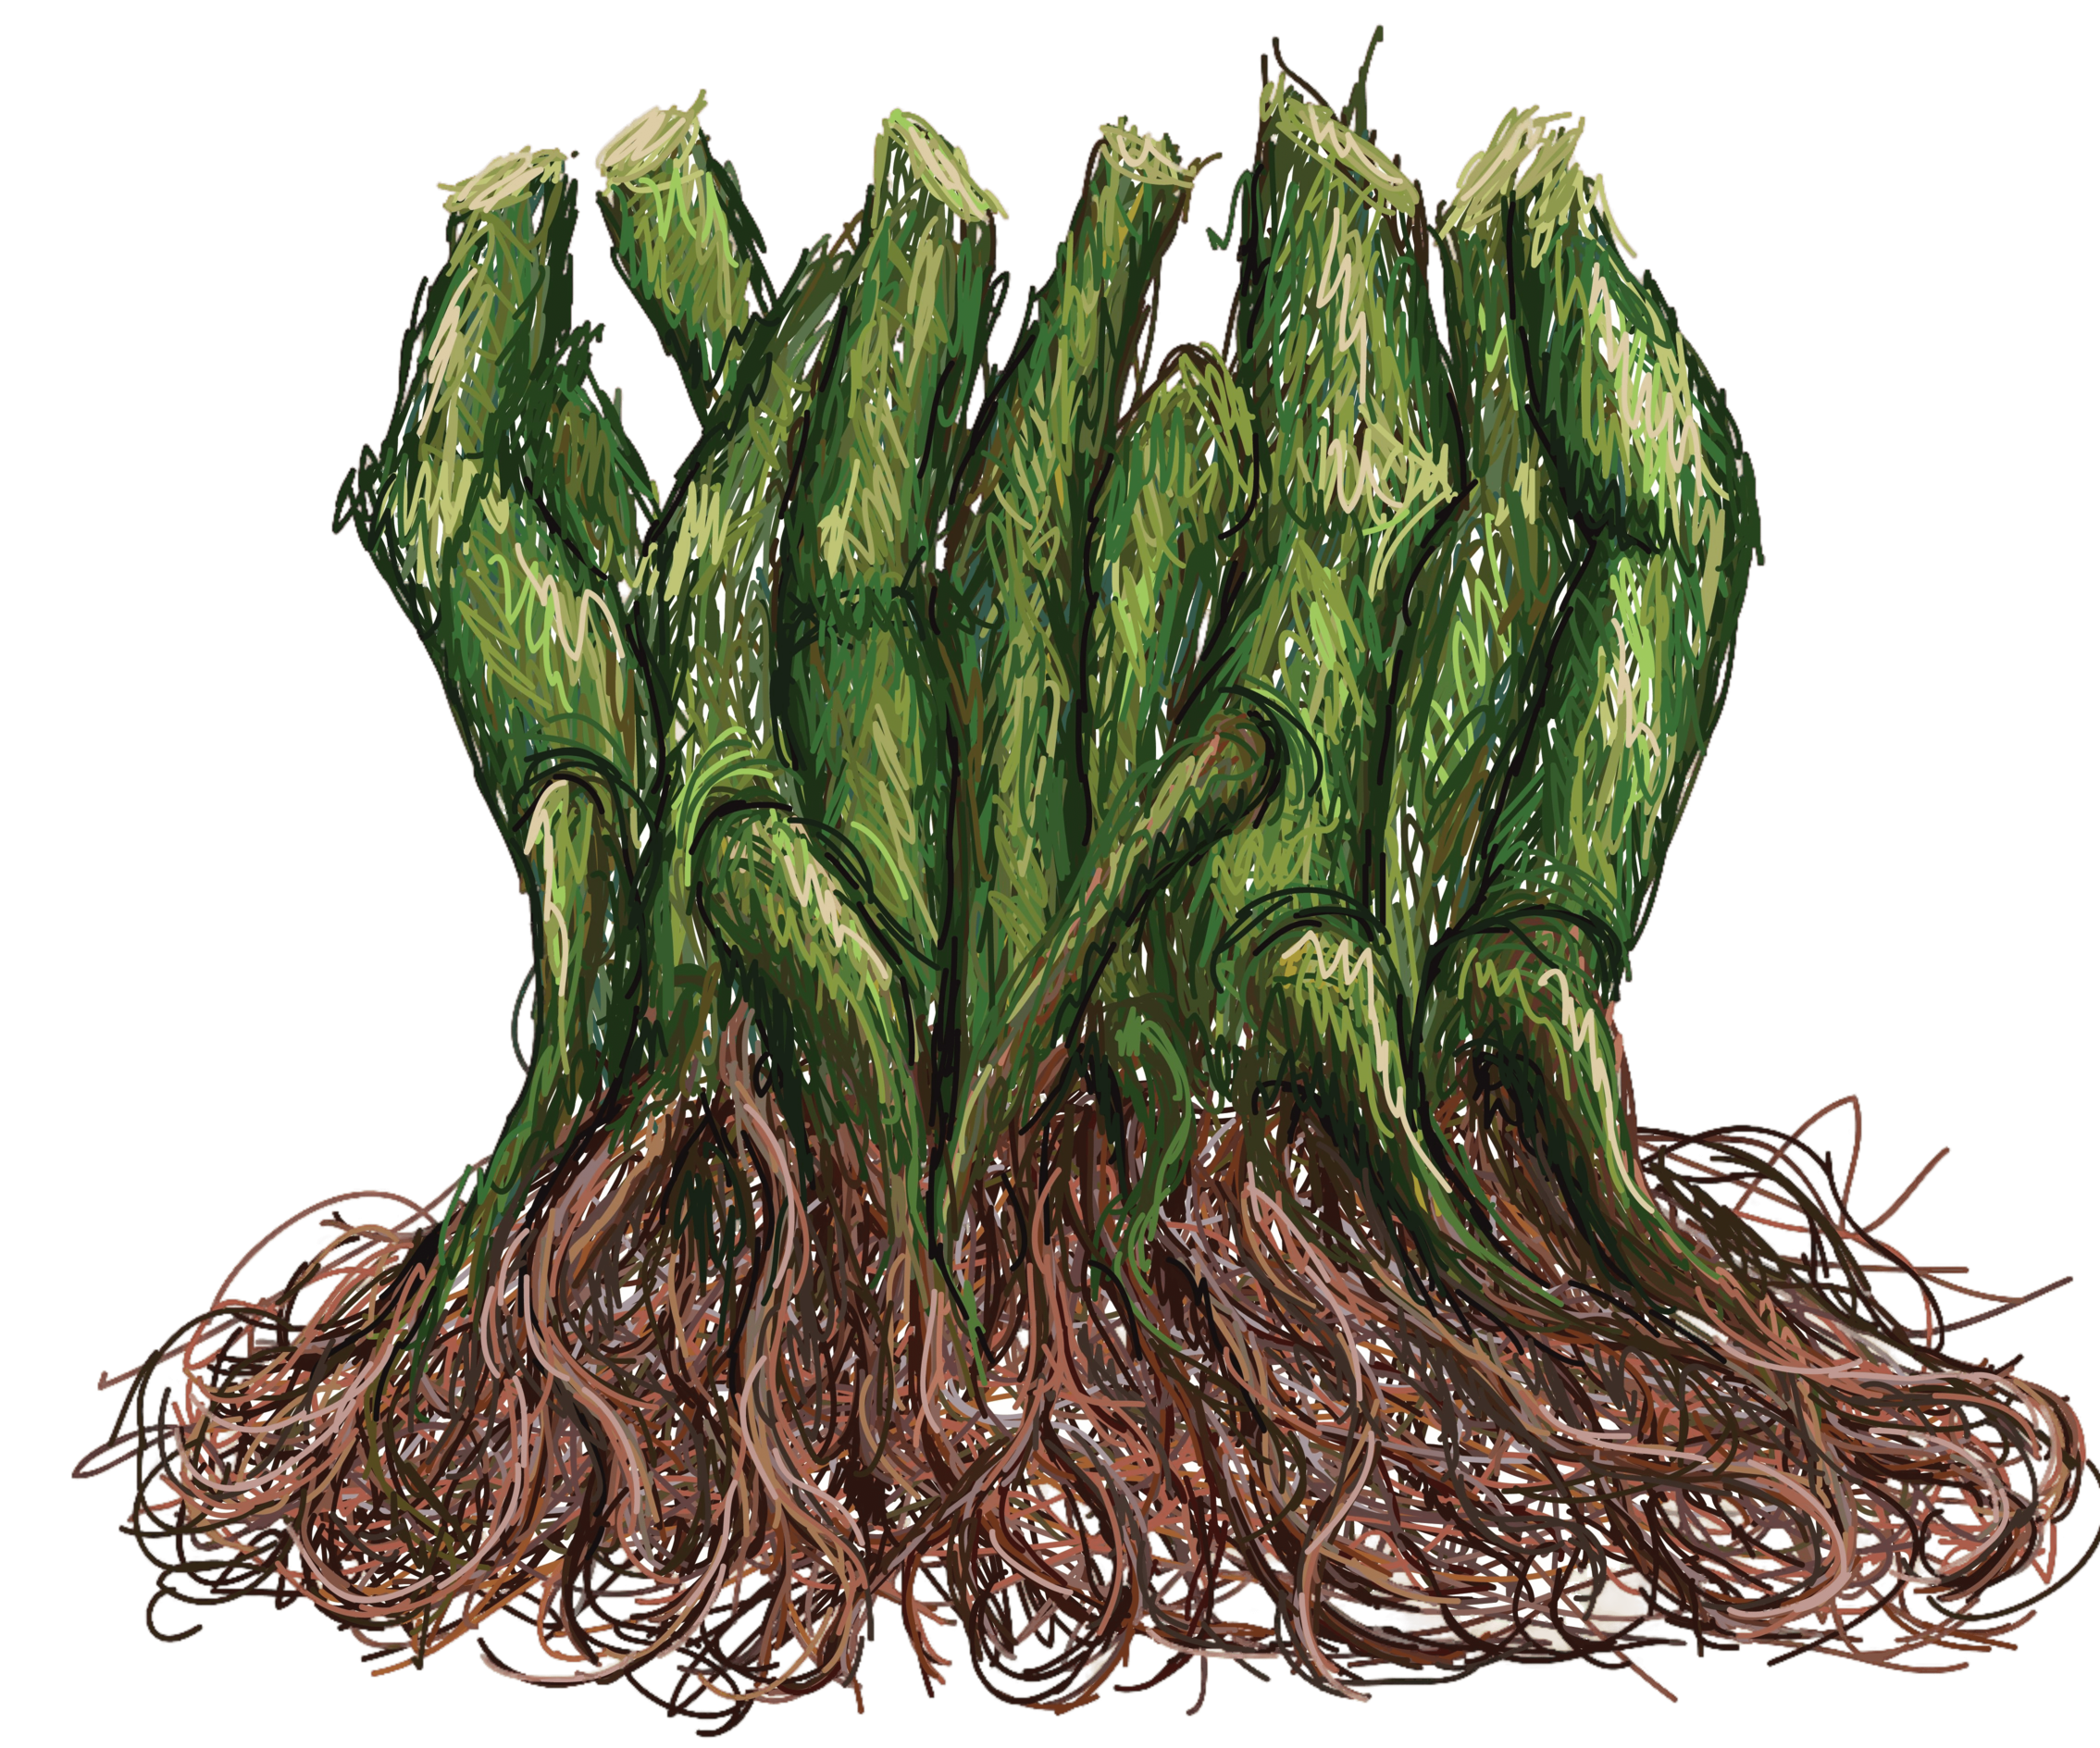 Kavahana - an illustration of the kava root: a natural ingredient in kava beverage preparation